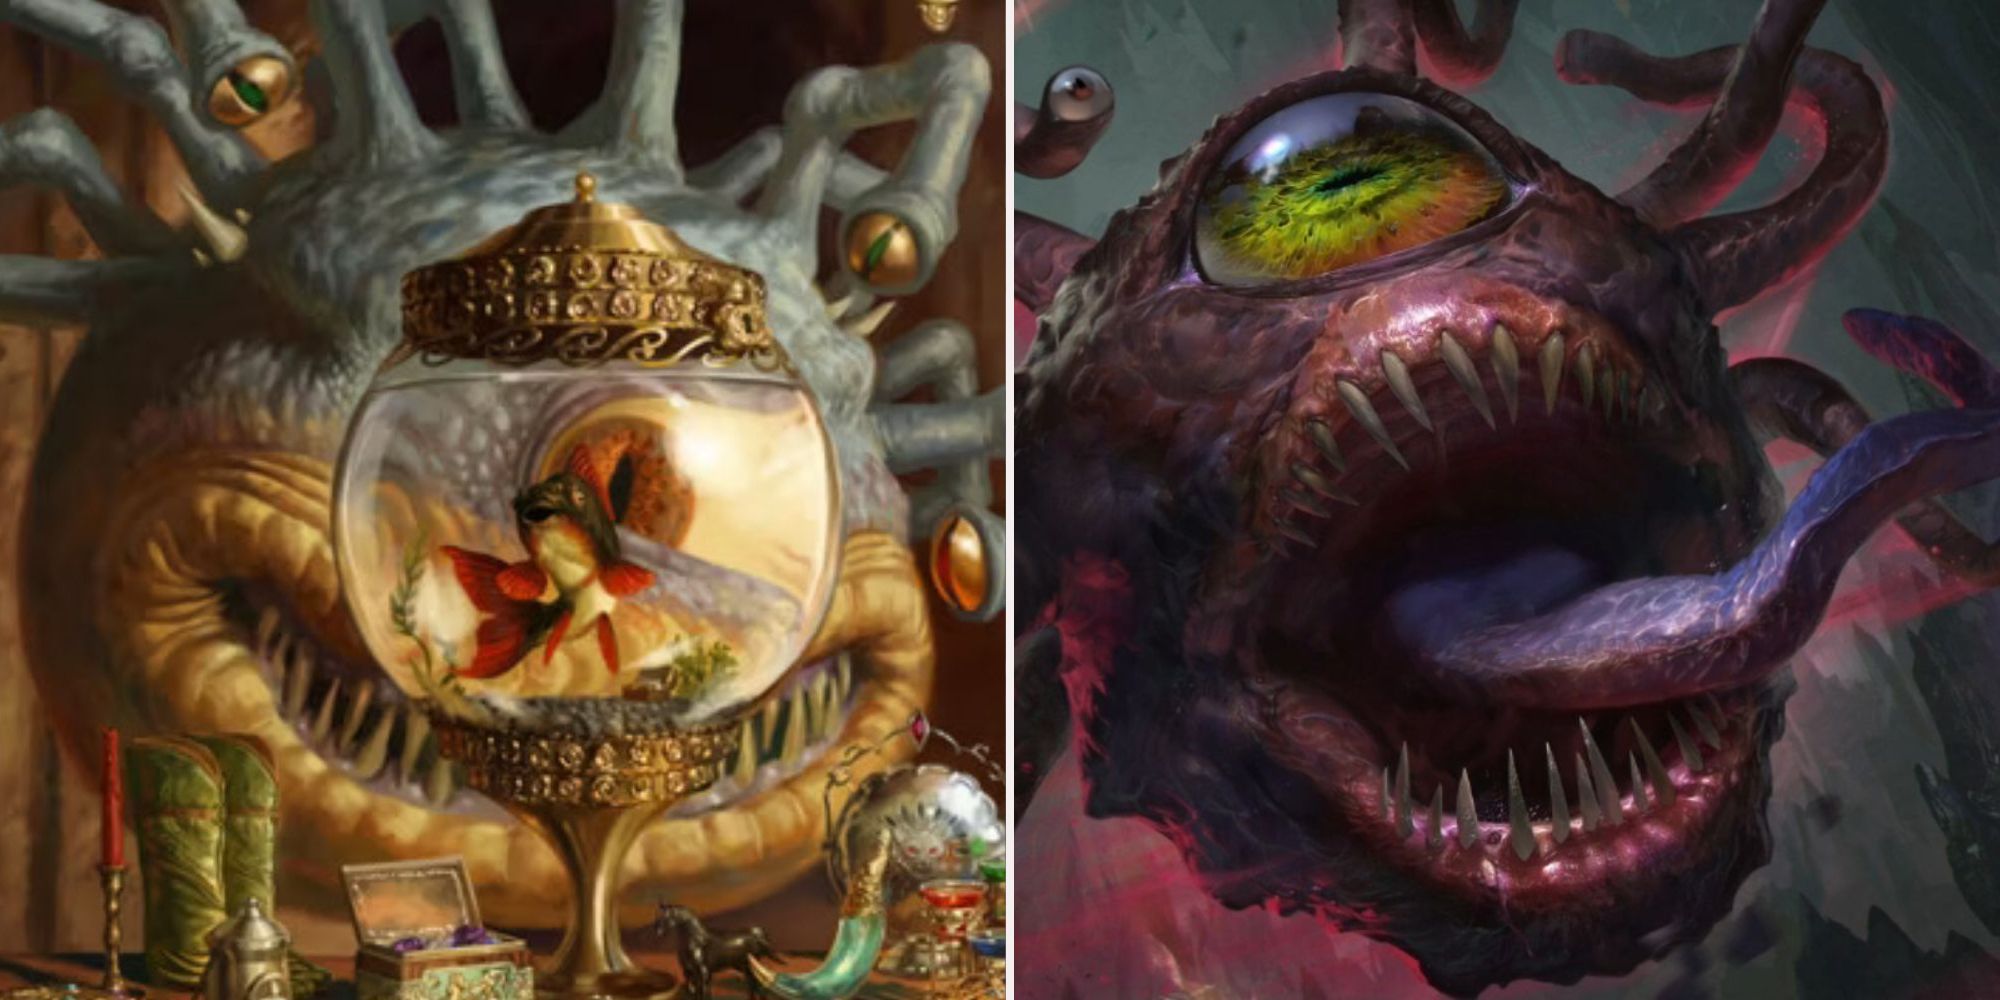 A Beholder studies his environment on the cover of Xanathar's Guide To Everything and mad Beholder with teeth bared and mouth open.